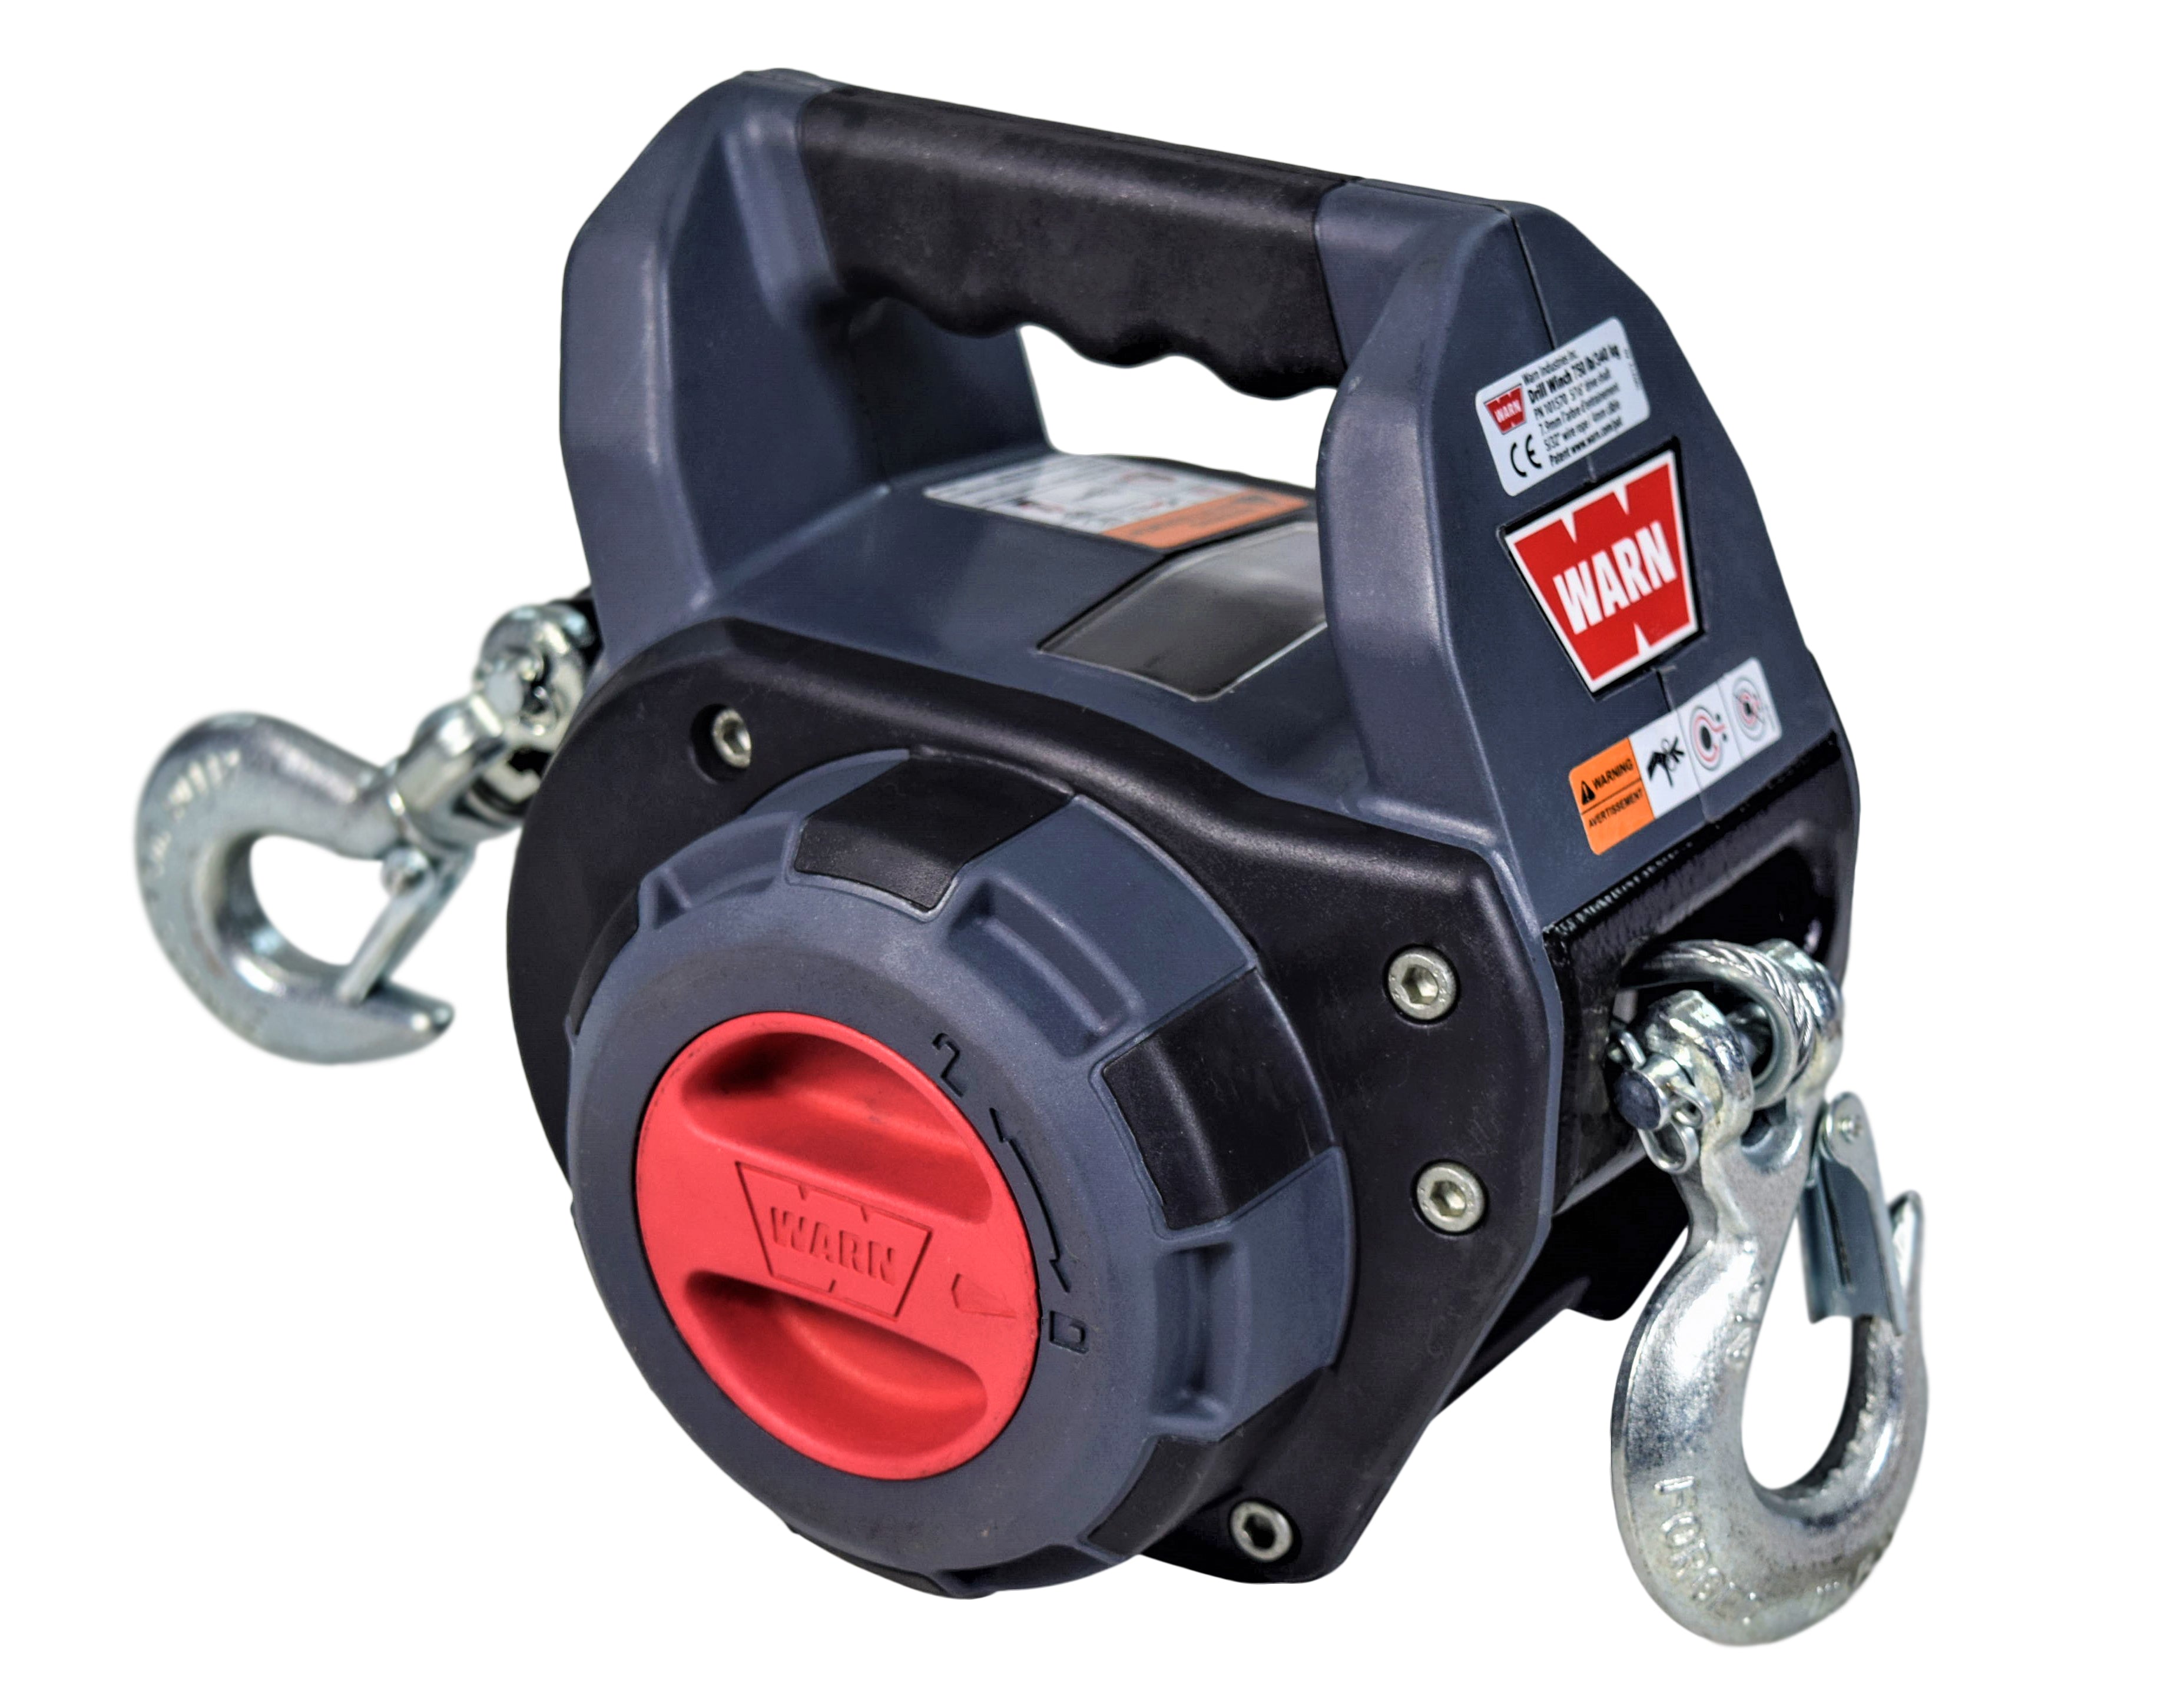  WARN 101570 Handheld Portable Drill Winch with 40 Foot Steel  Wire Rope: 750 lb Pulling Capacity , Gray : Automotive